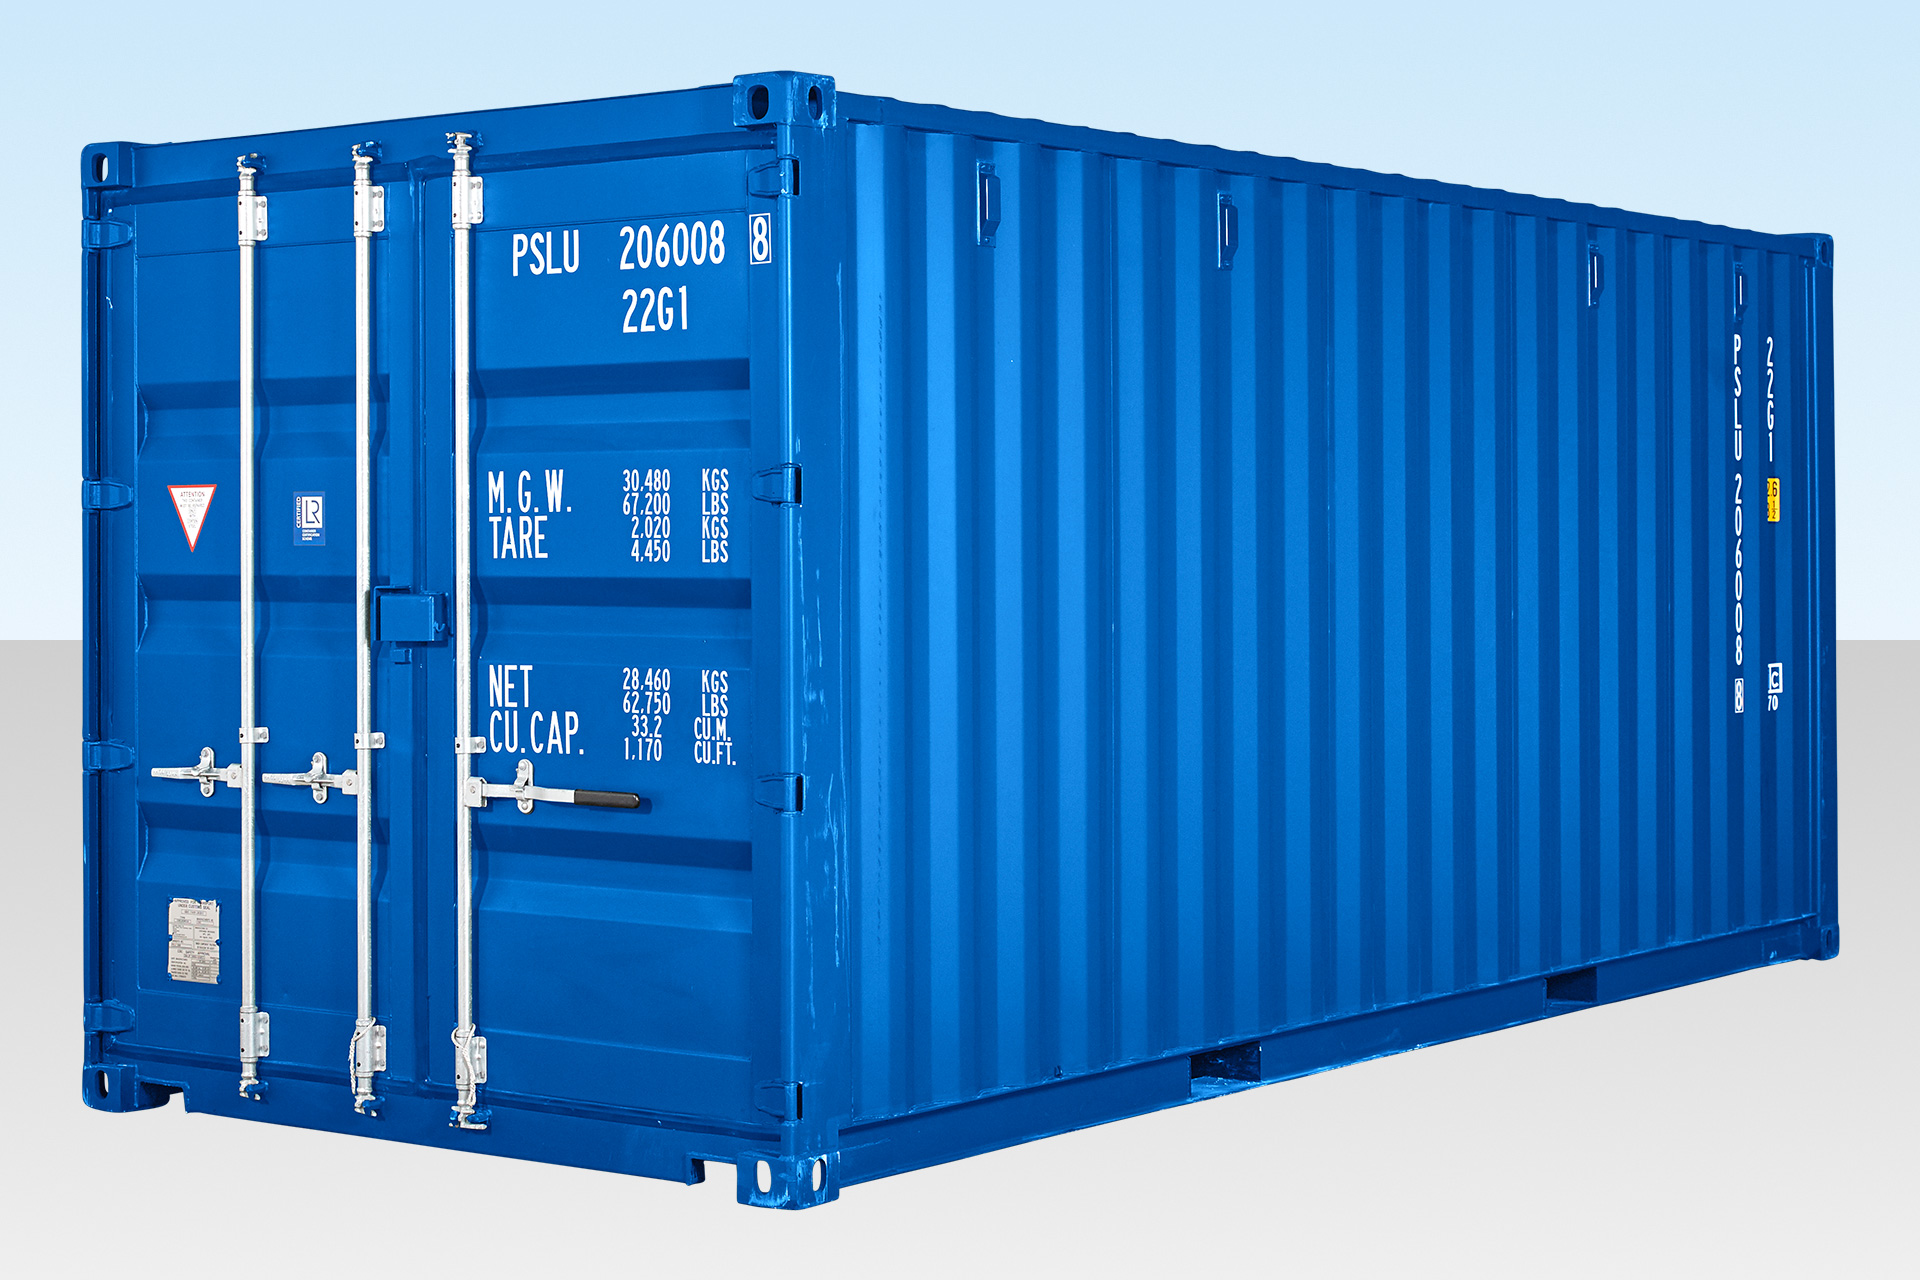 BUY 20FT SELF STORAGE CONTAINER WITH BAMBOO FLOOR – BLUE (RAL 5010) AT WWW.HELLOCONTAINERS.COM